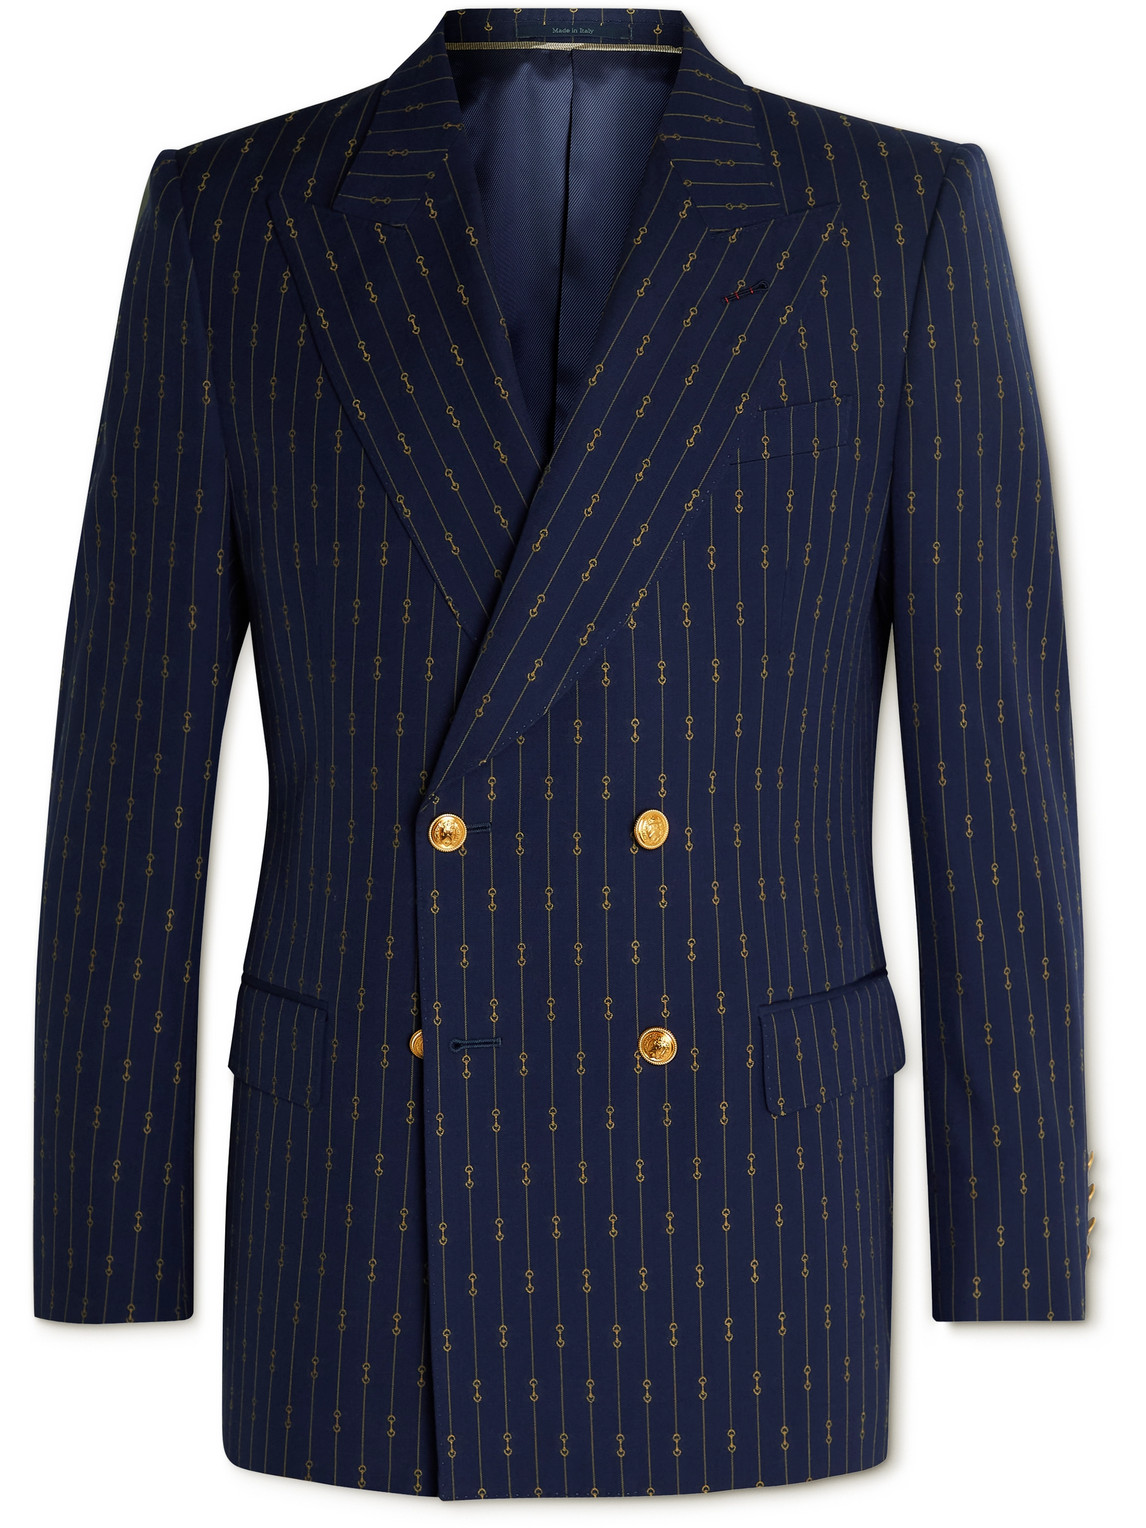 GUCCI DOUBLE-BREASTED STRIPED WOOL-TWILL BLAZER